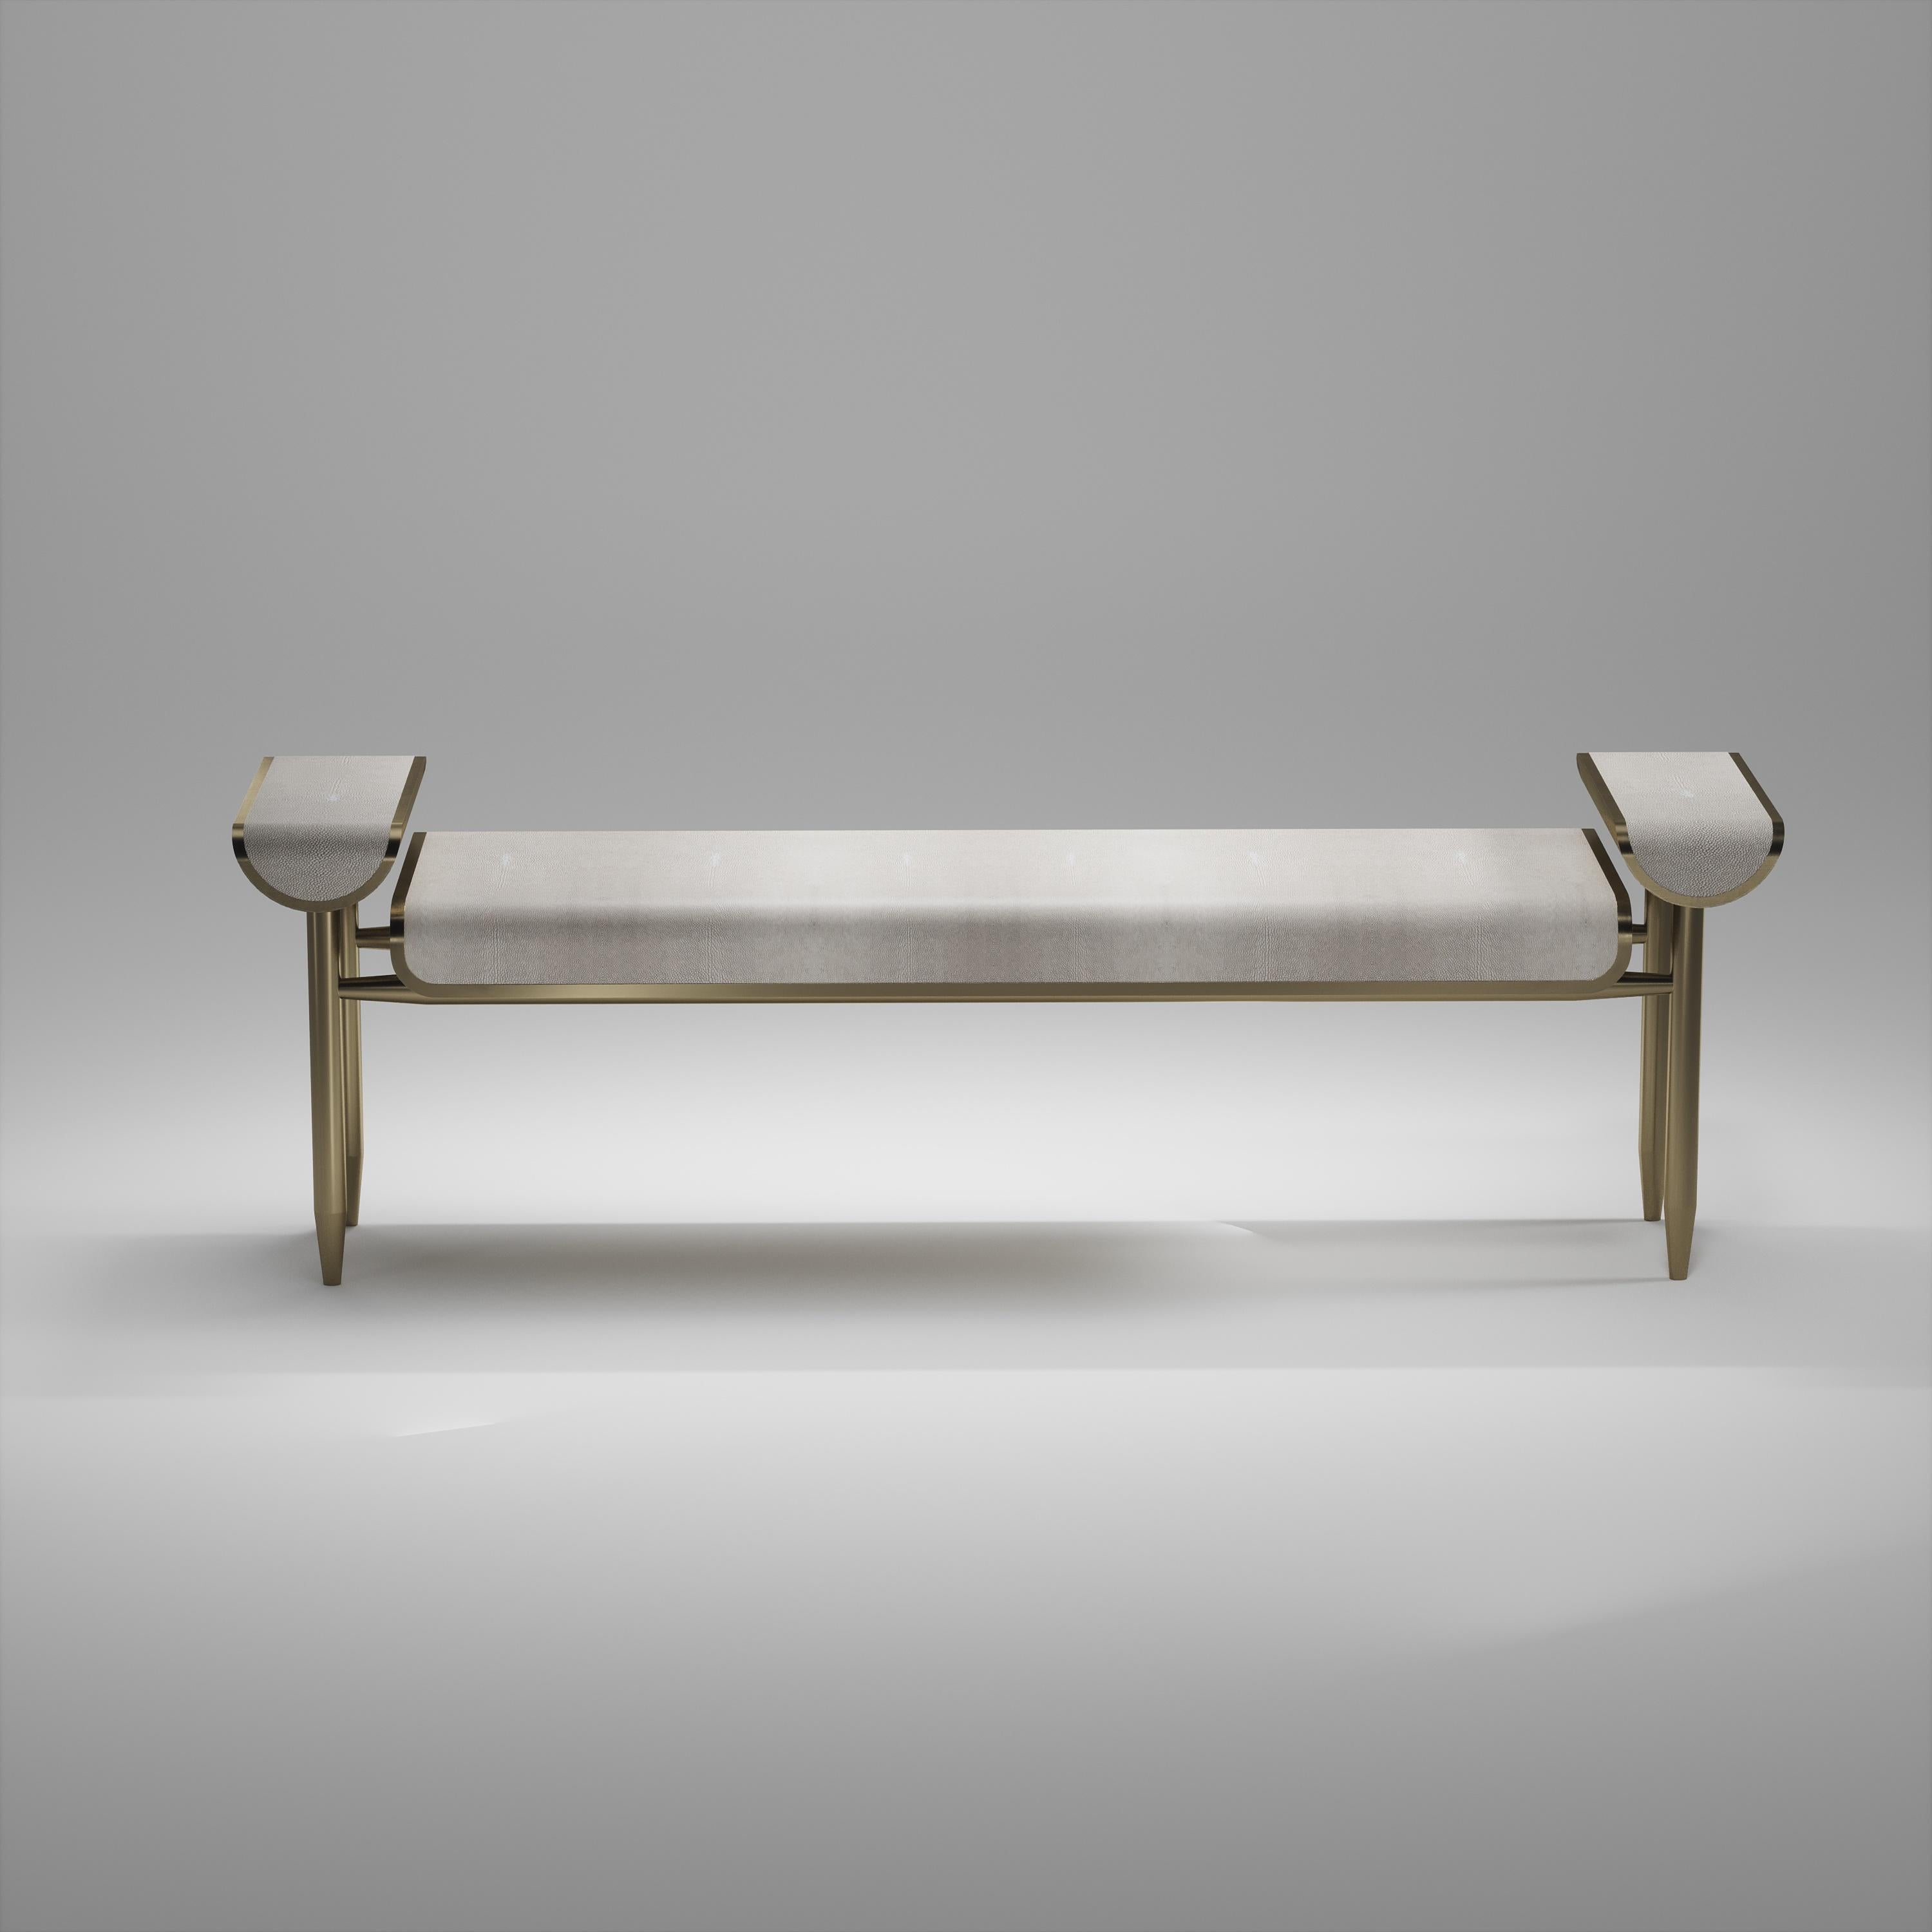 Inspired by the original Dandy bench by Kifu Paris (see images at end of slide), the Dandy II Tabletop Bench is the ultimate luxury seating. The seating area is inlaid in cream shagreen and the frame, legs and sides of the bench are completely